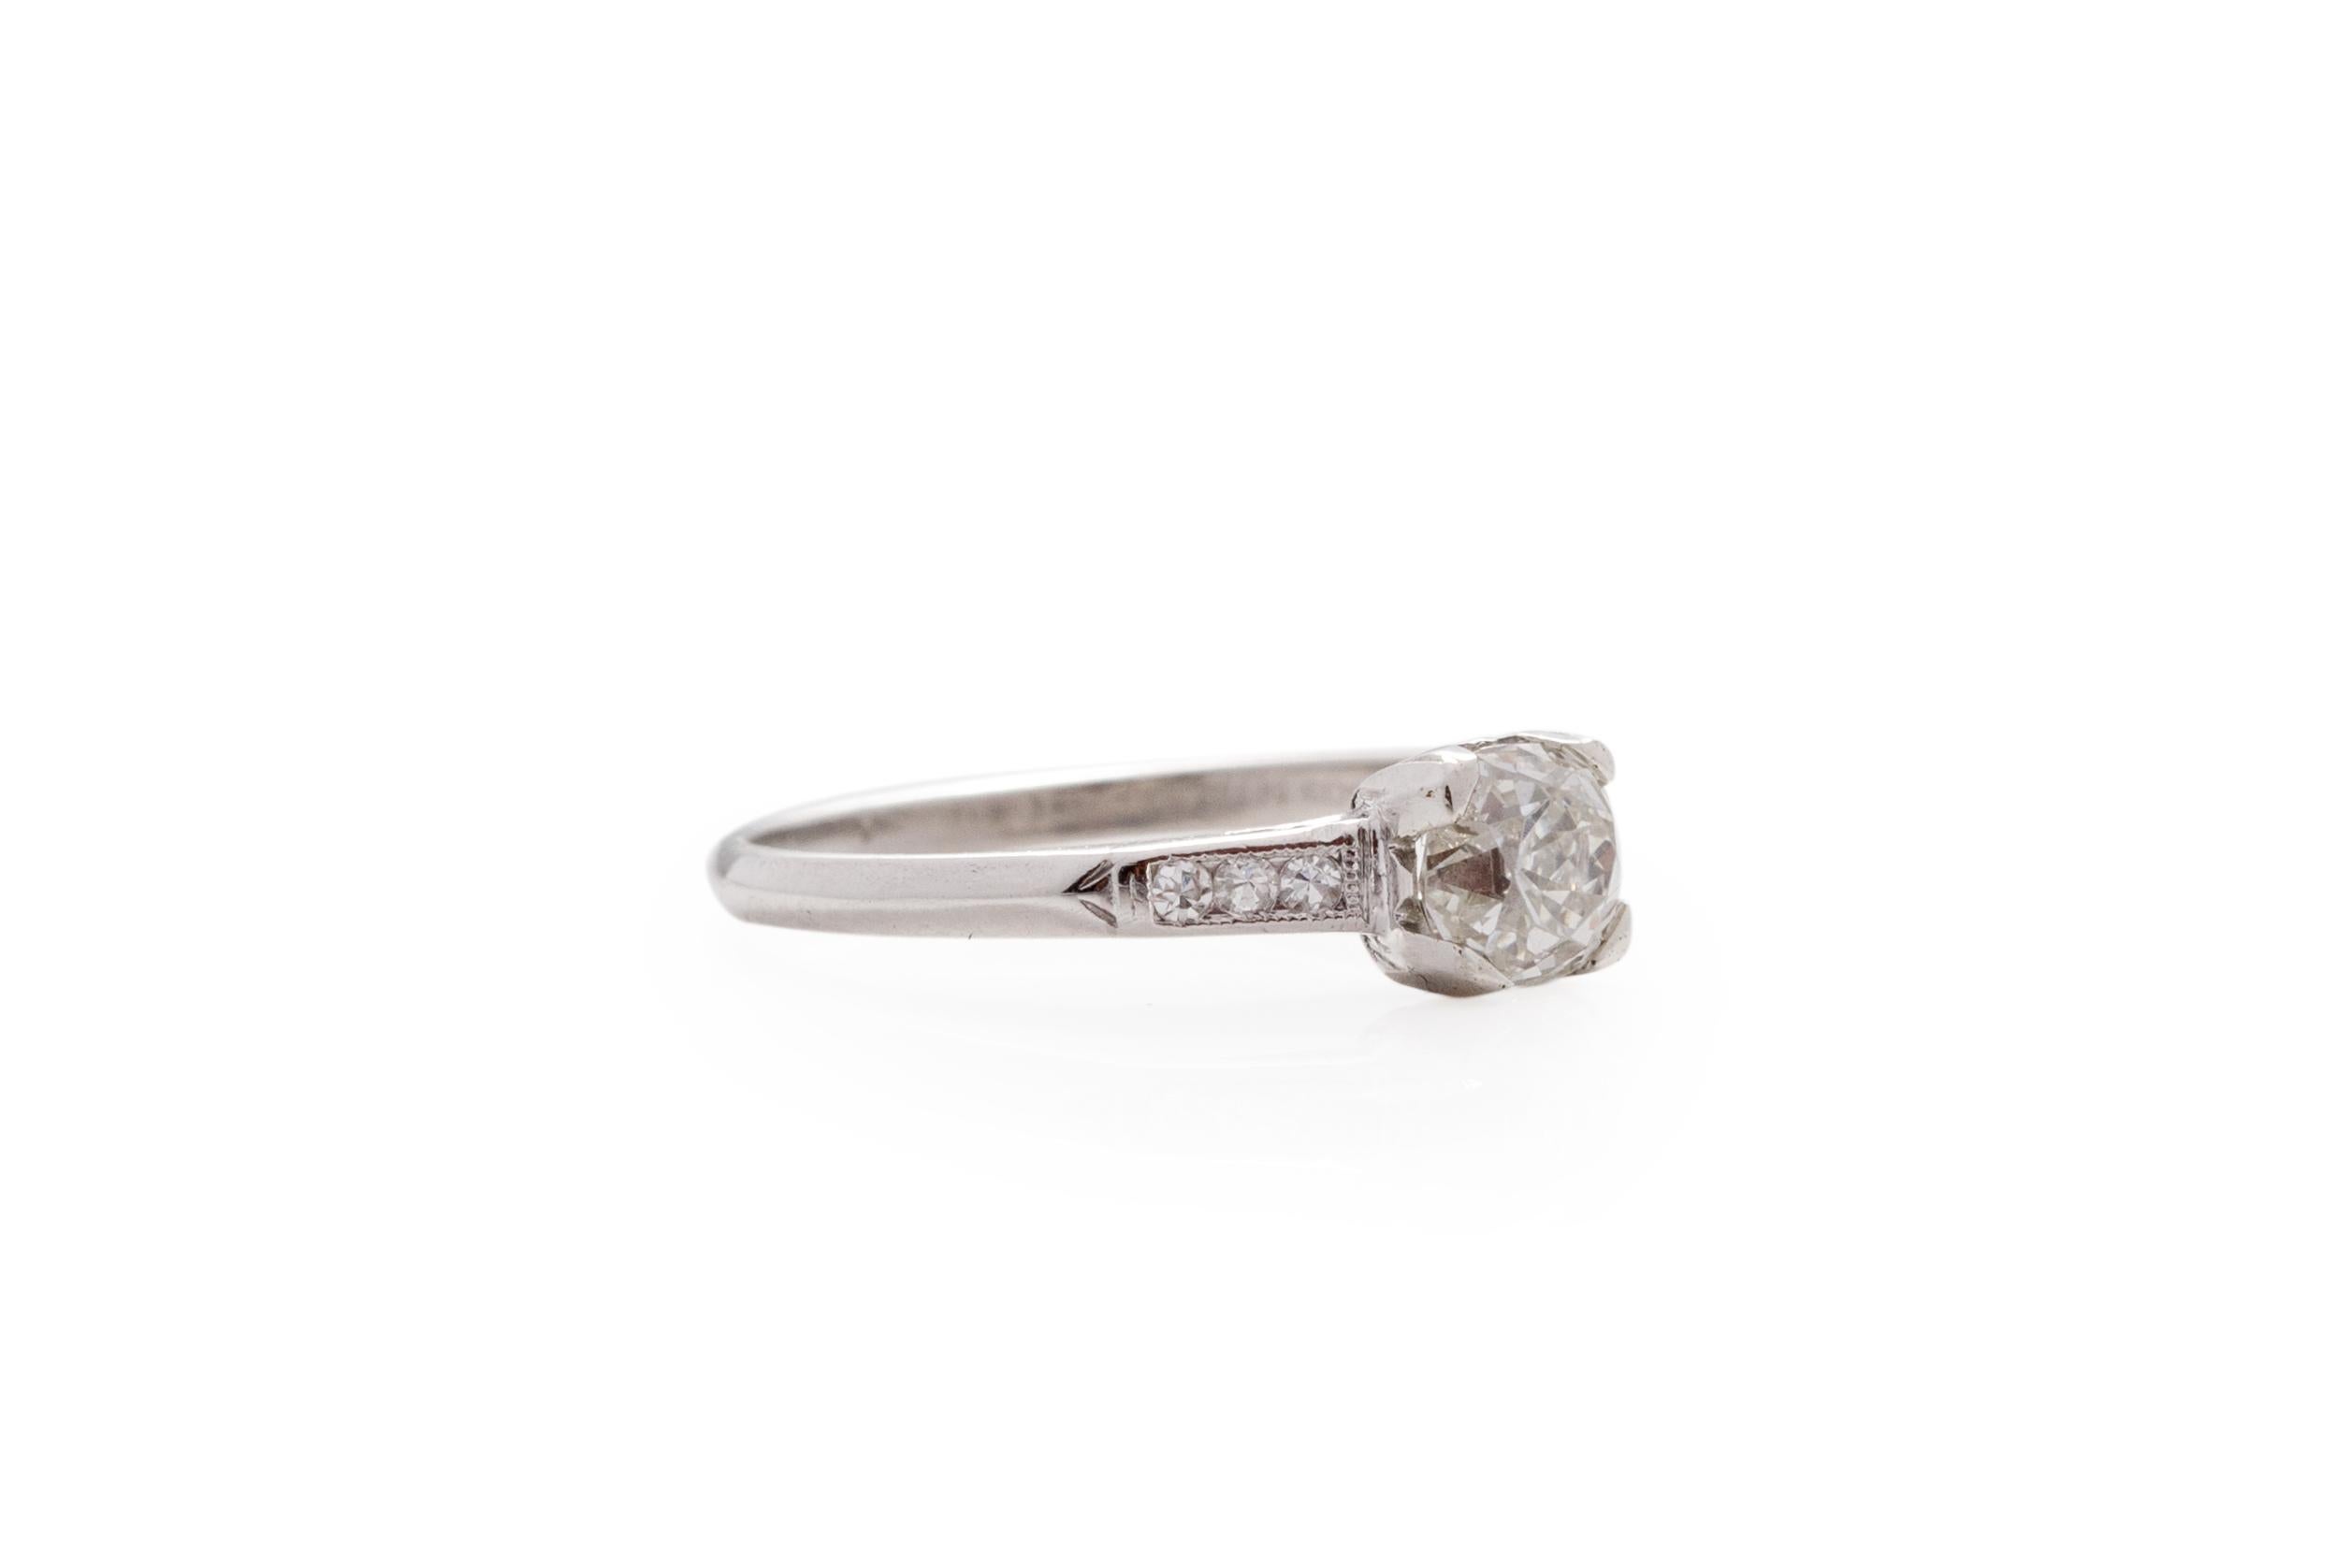 Ring Size: 5.5
Metal Type: Platinum [Hallmarked, and Tested]
Weight: 3.0 grams

Center Diamond Details:
Weight: .80 carat
Cut: Antique Cushion ( Old Mine brilliant )
Color: J
Clarity: VS2

Side Stone Details:
Weight: .10 carat total weight
Cut: